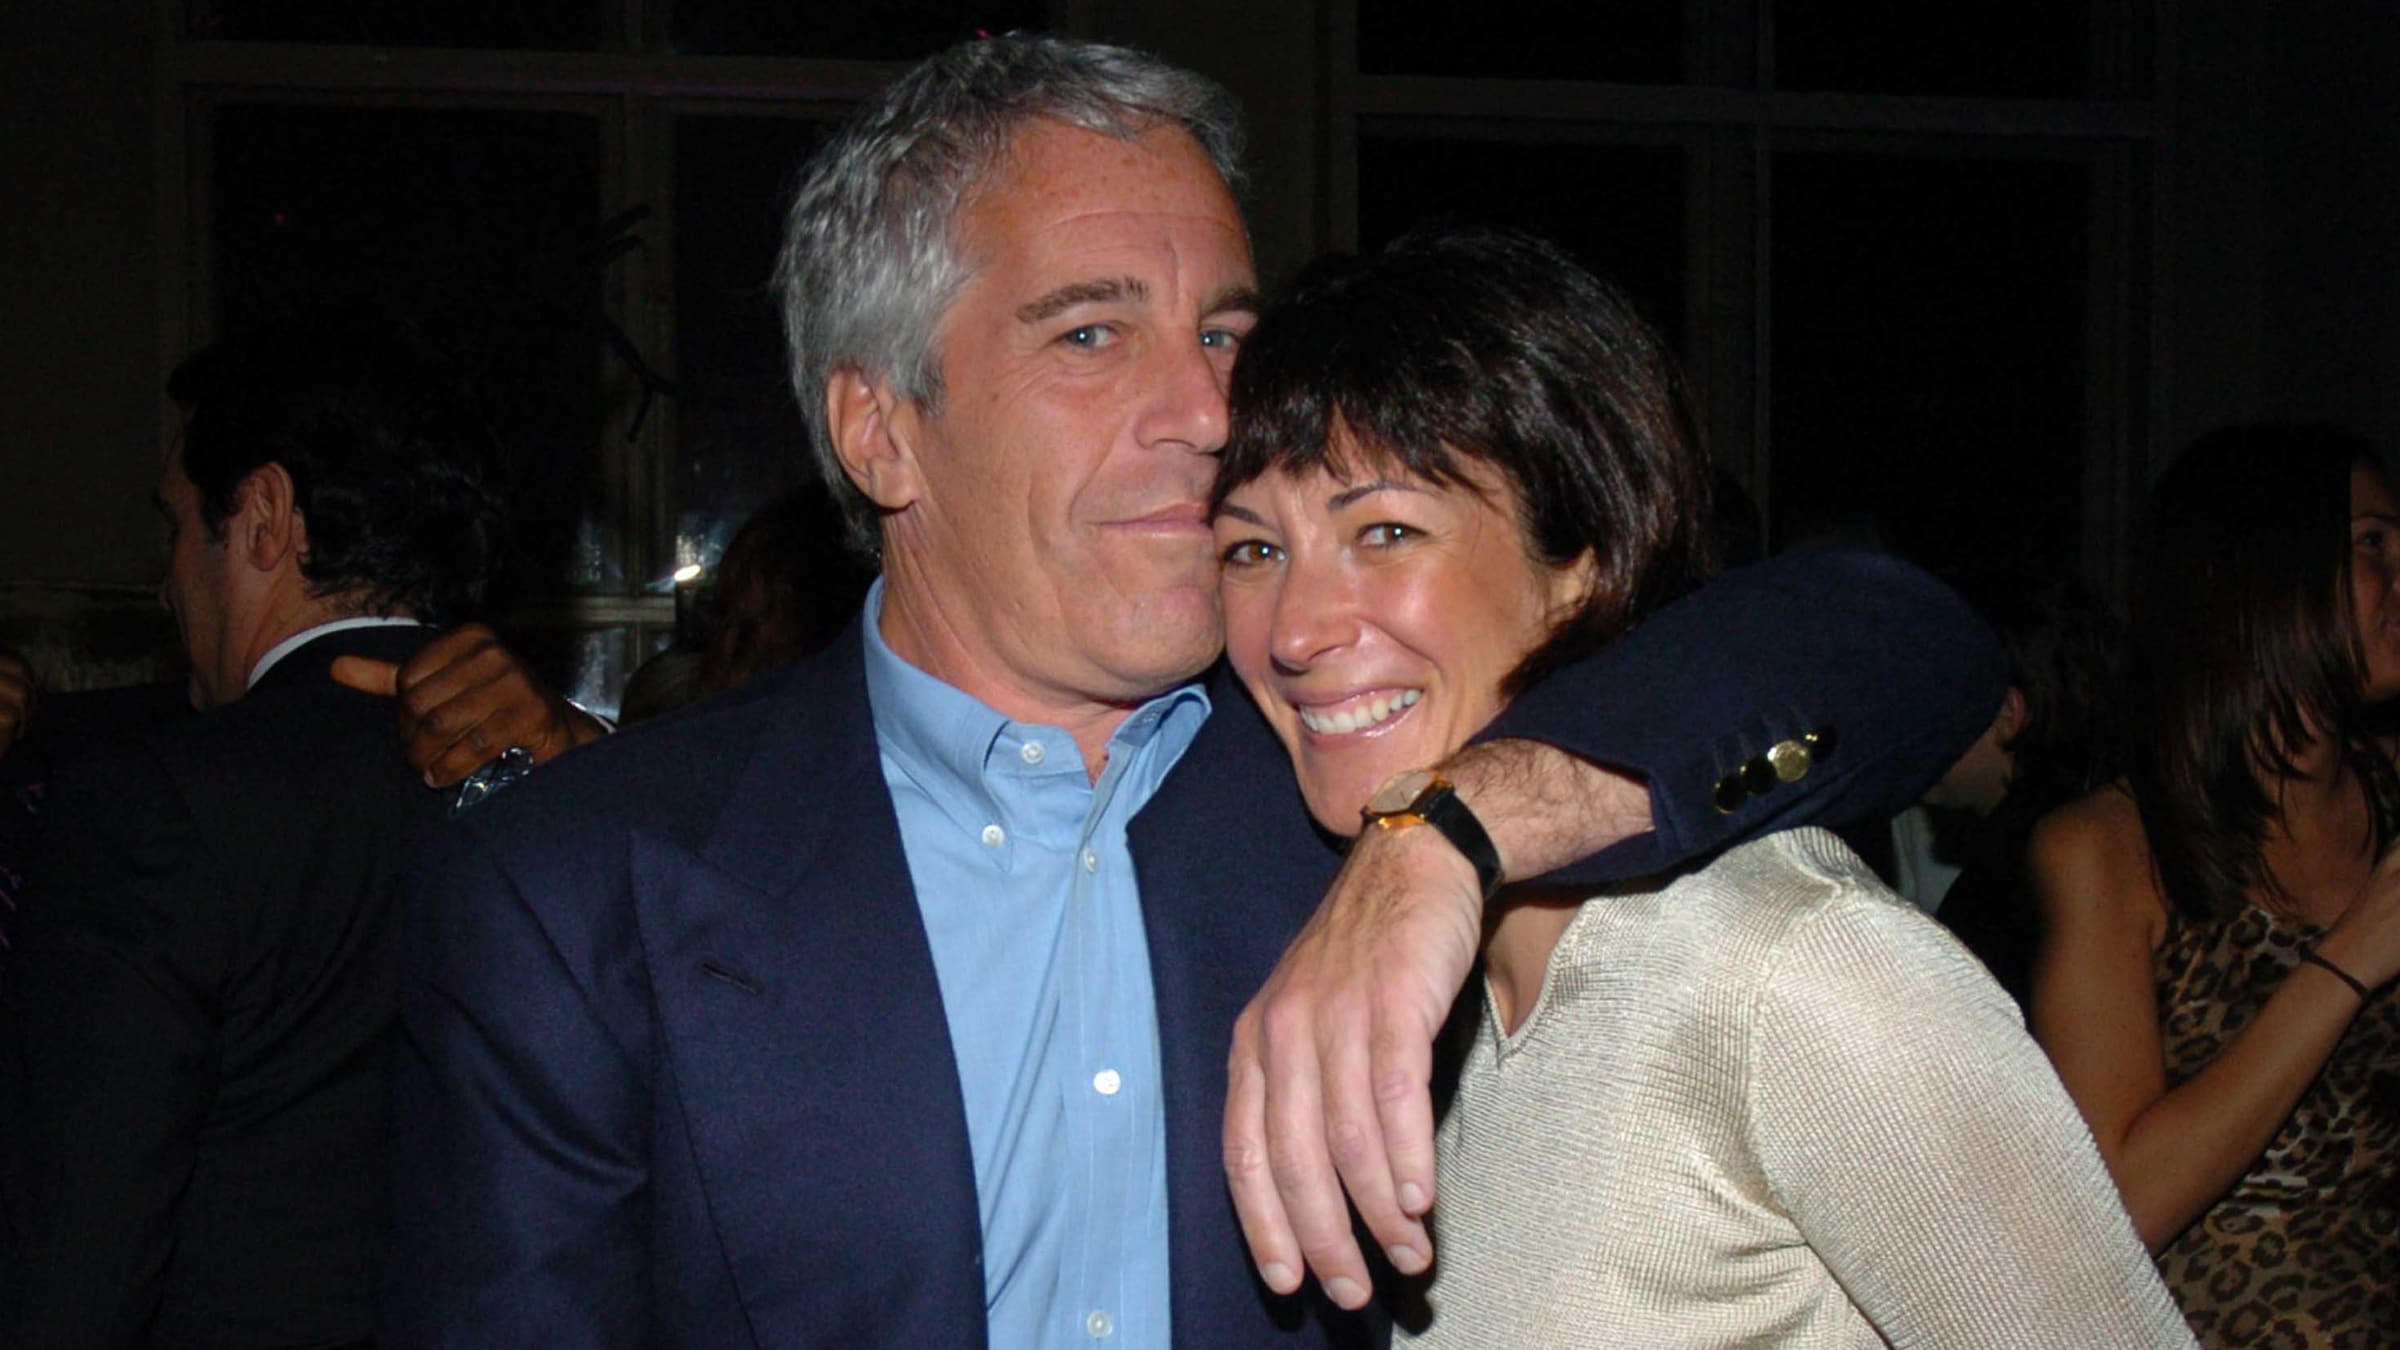 New Docuseries Suggests Jeffrey Epstein Was a Government Informant